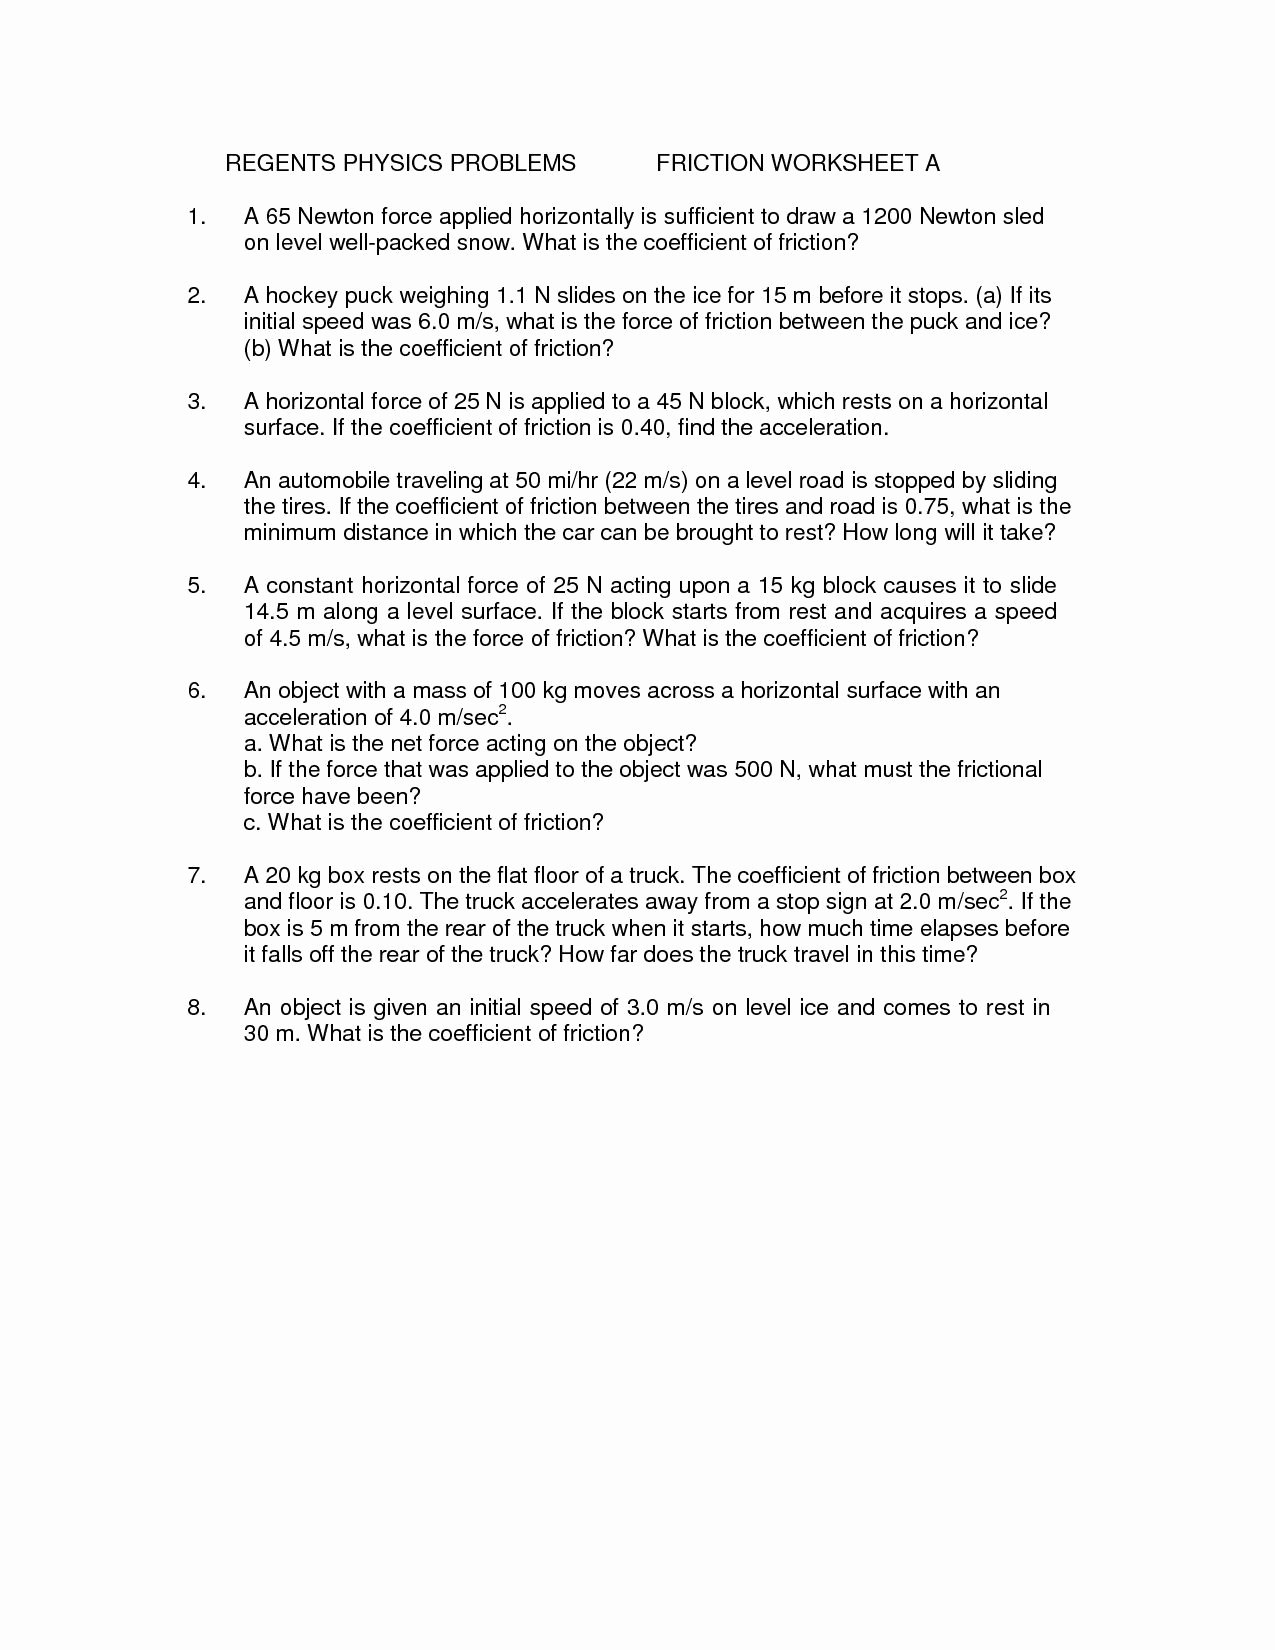 Coefficient Of Friction Worksheet Answers Unique 39 Coefficient Friction Worksheet